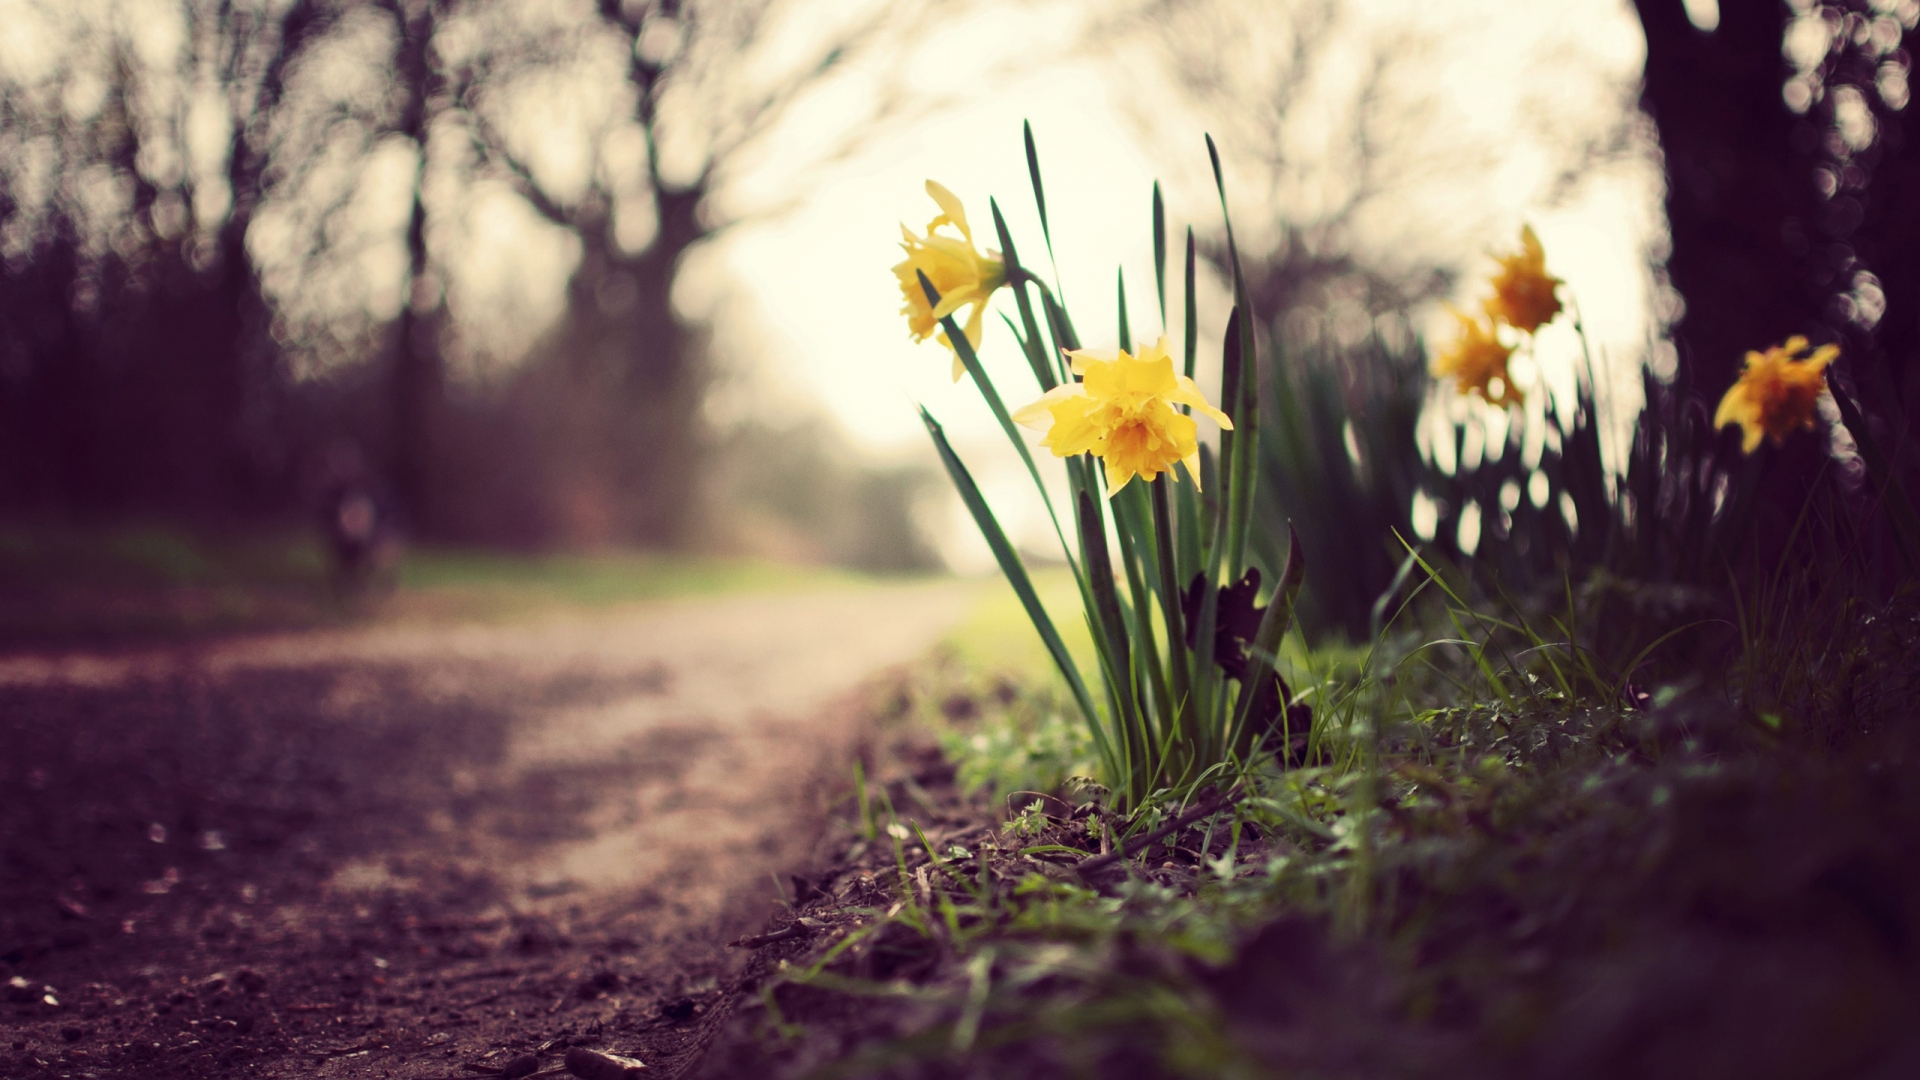 Daffodils on the Road for 1920 x 1080 HDTV 1080p resolution